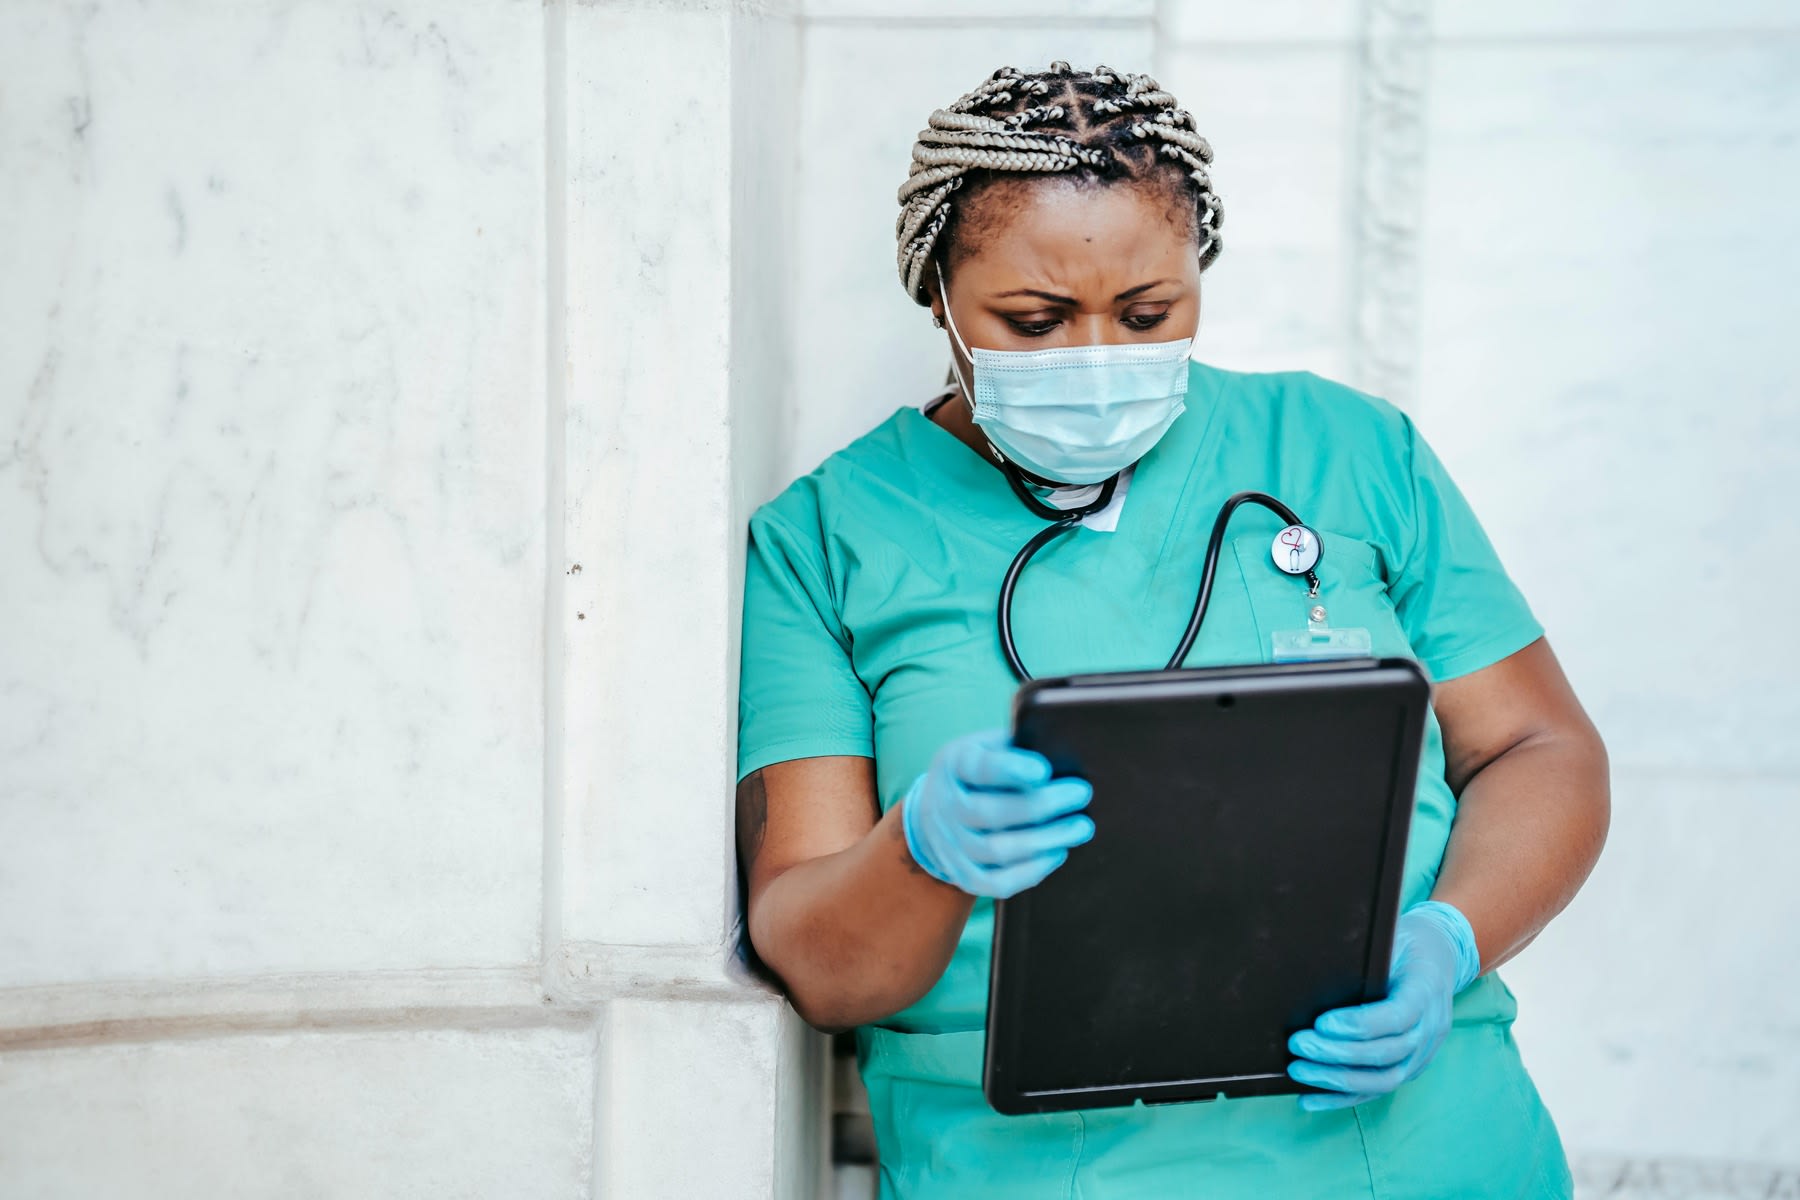 Nurse with gloved hands looking at her tablet